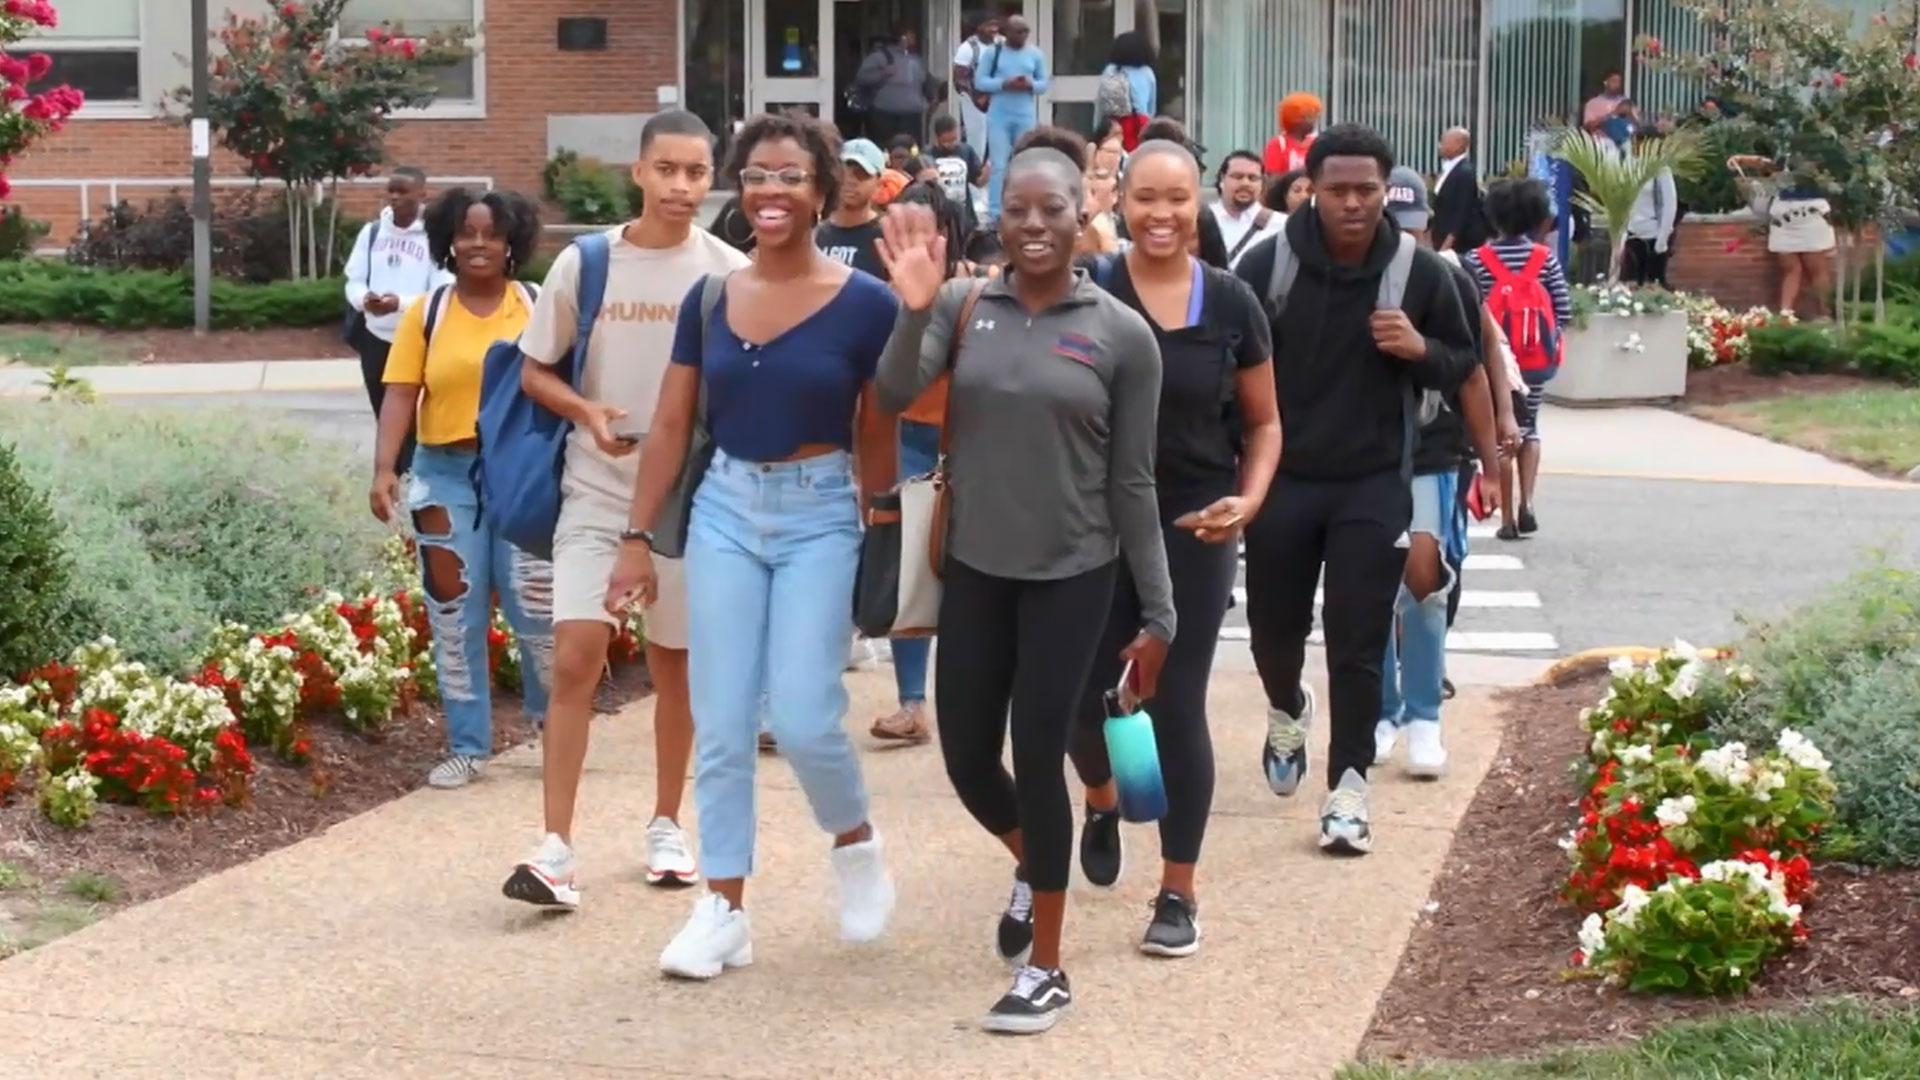 State Circle Special: What’s New at Your HBCU?